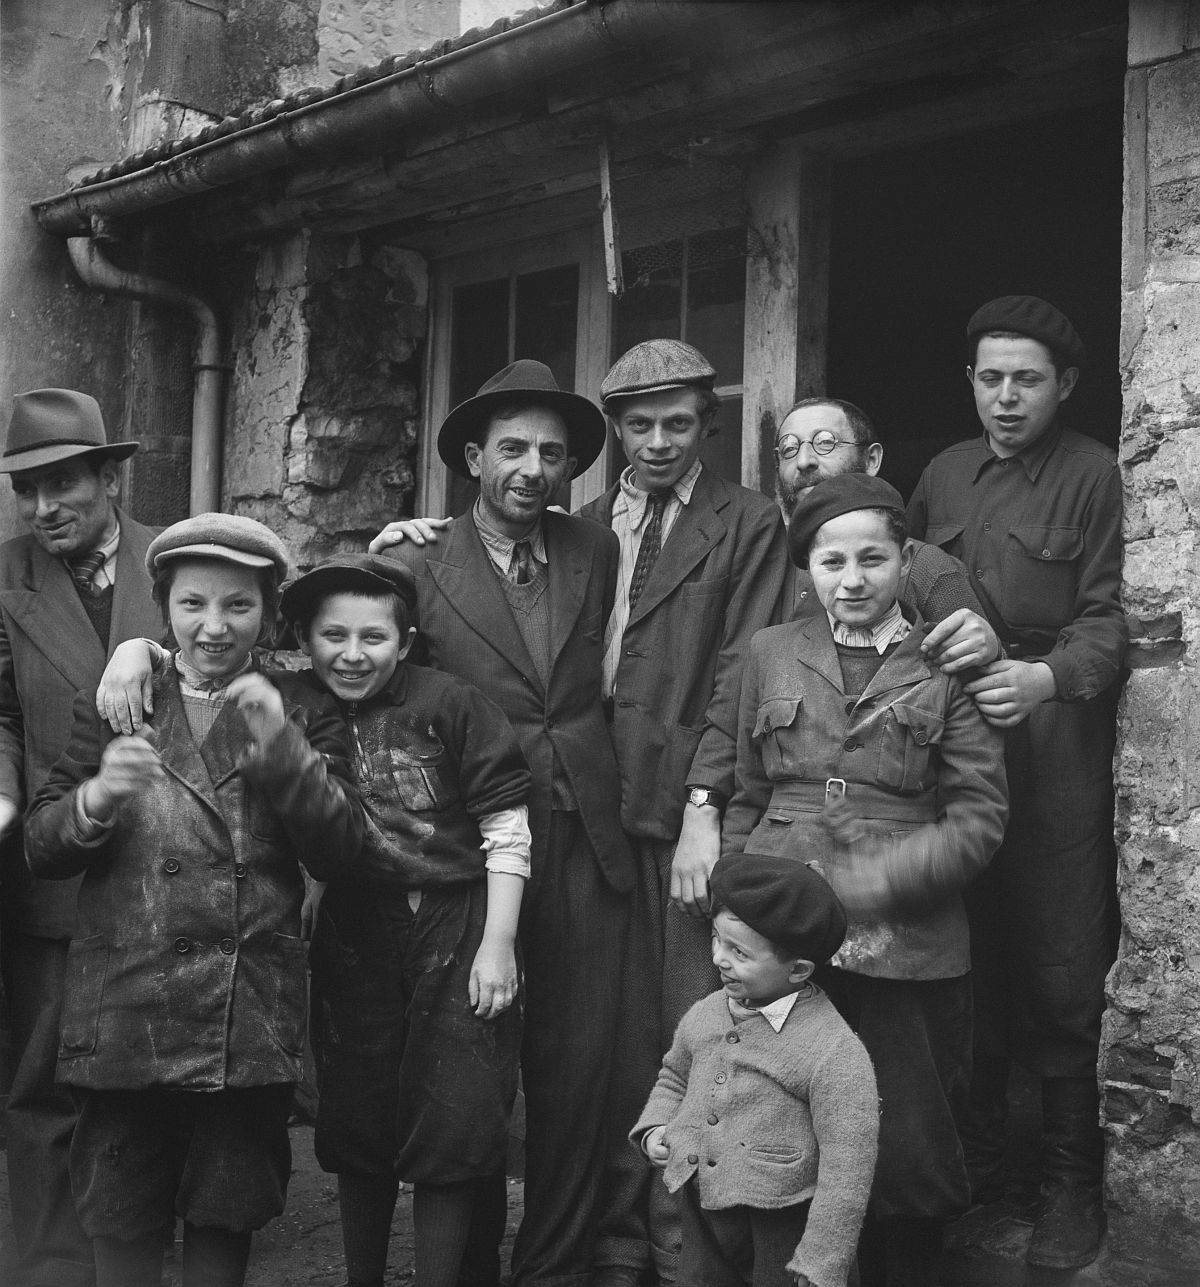 Roman Vishniac, [Holocaust survivors gathering outside a building where matzoh is being made in preparations for the Passover holiday, Hénonville Displaced Persons’ Camp, Picardy, France], 1947. Ink-jet print. © Mara Vishniac Kohn, courtesy International Center of Photography.